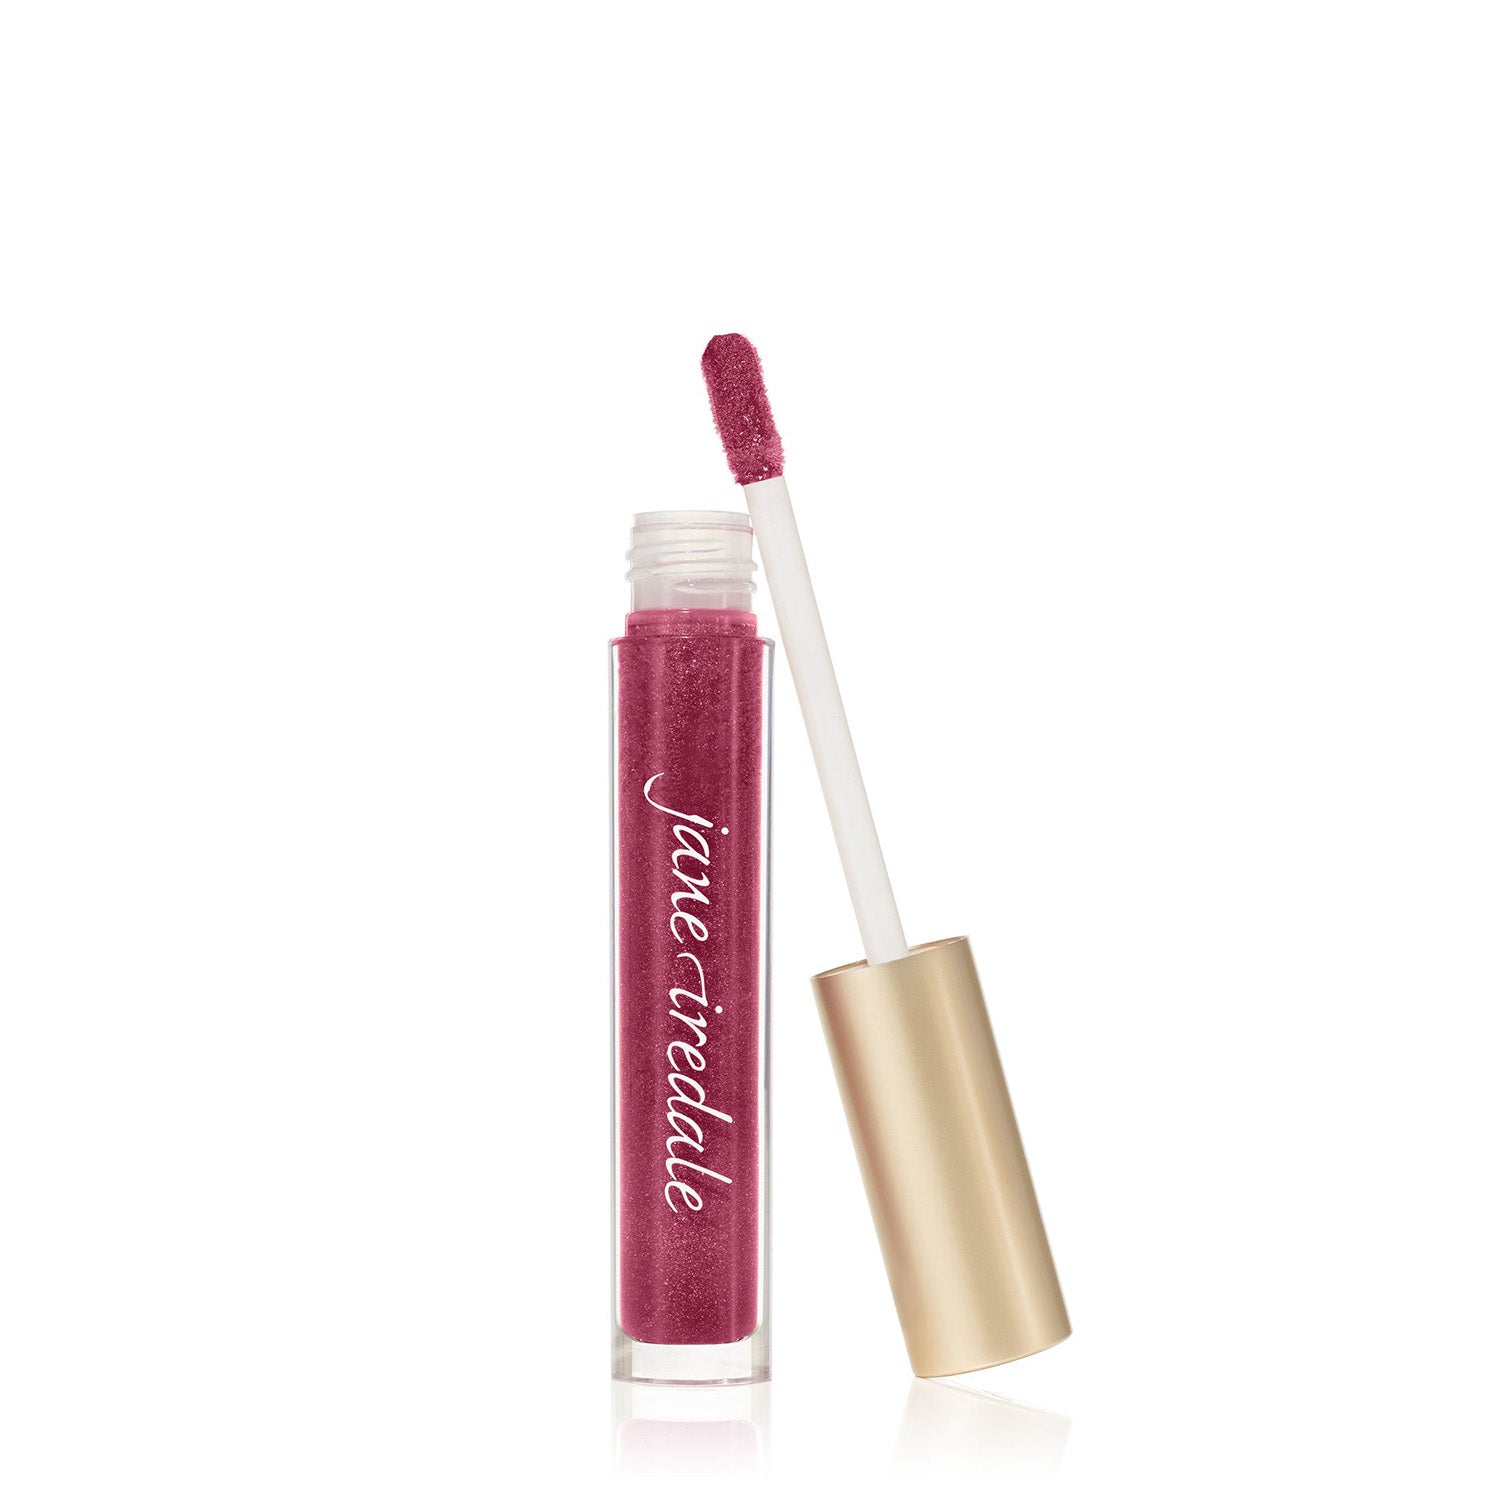 Jane Iredale Hydrapure Hyaluronic Lip Gloss / CANDIED ROSE